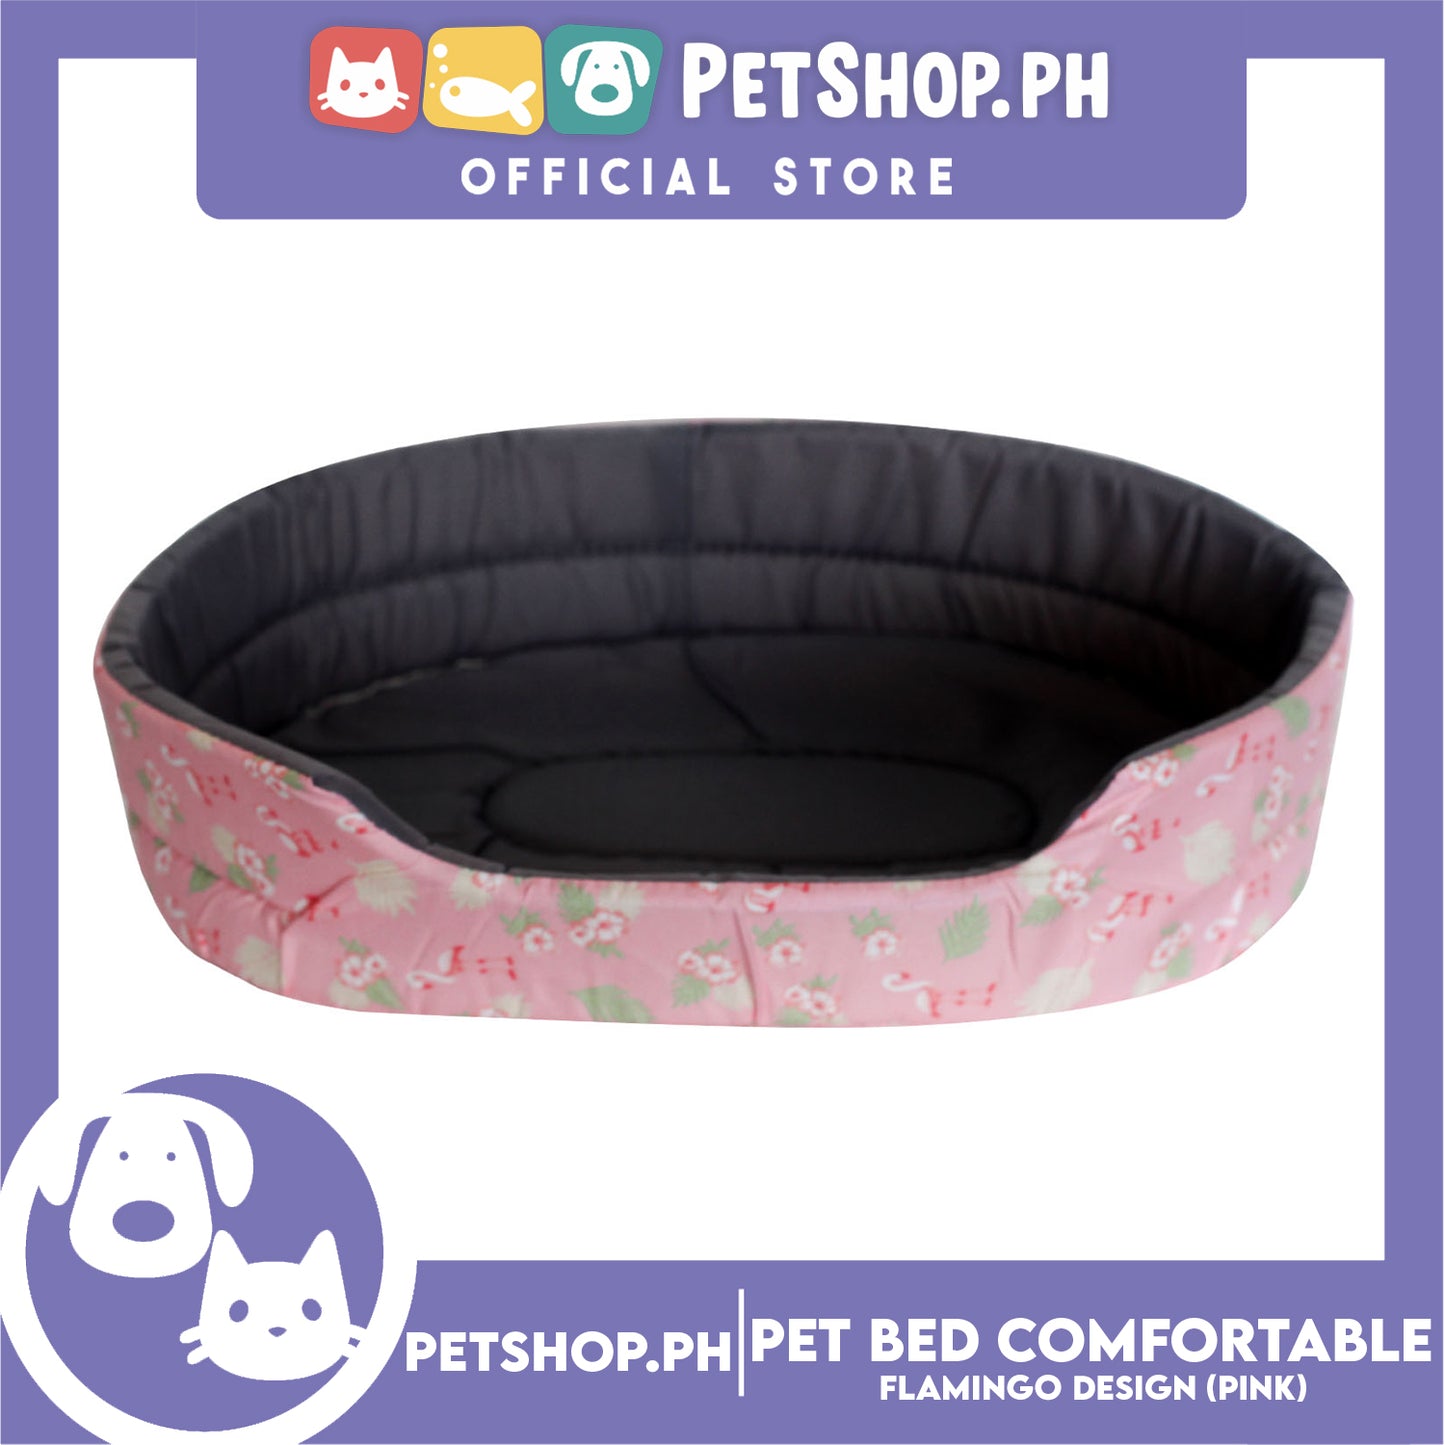 Pet Bed Comfortable Sleeping Bed with Flamingo Design 65x55x17cm for Dogs & Cats Pink